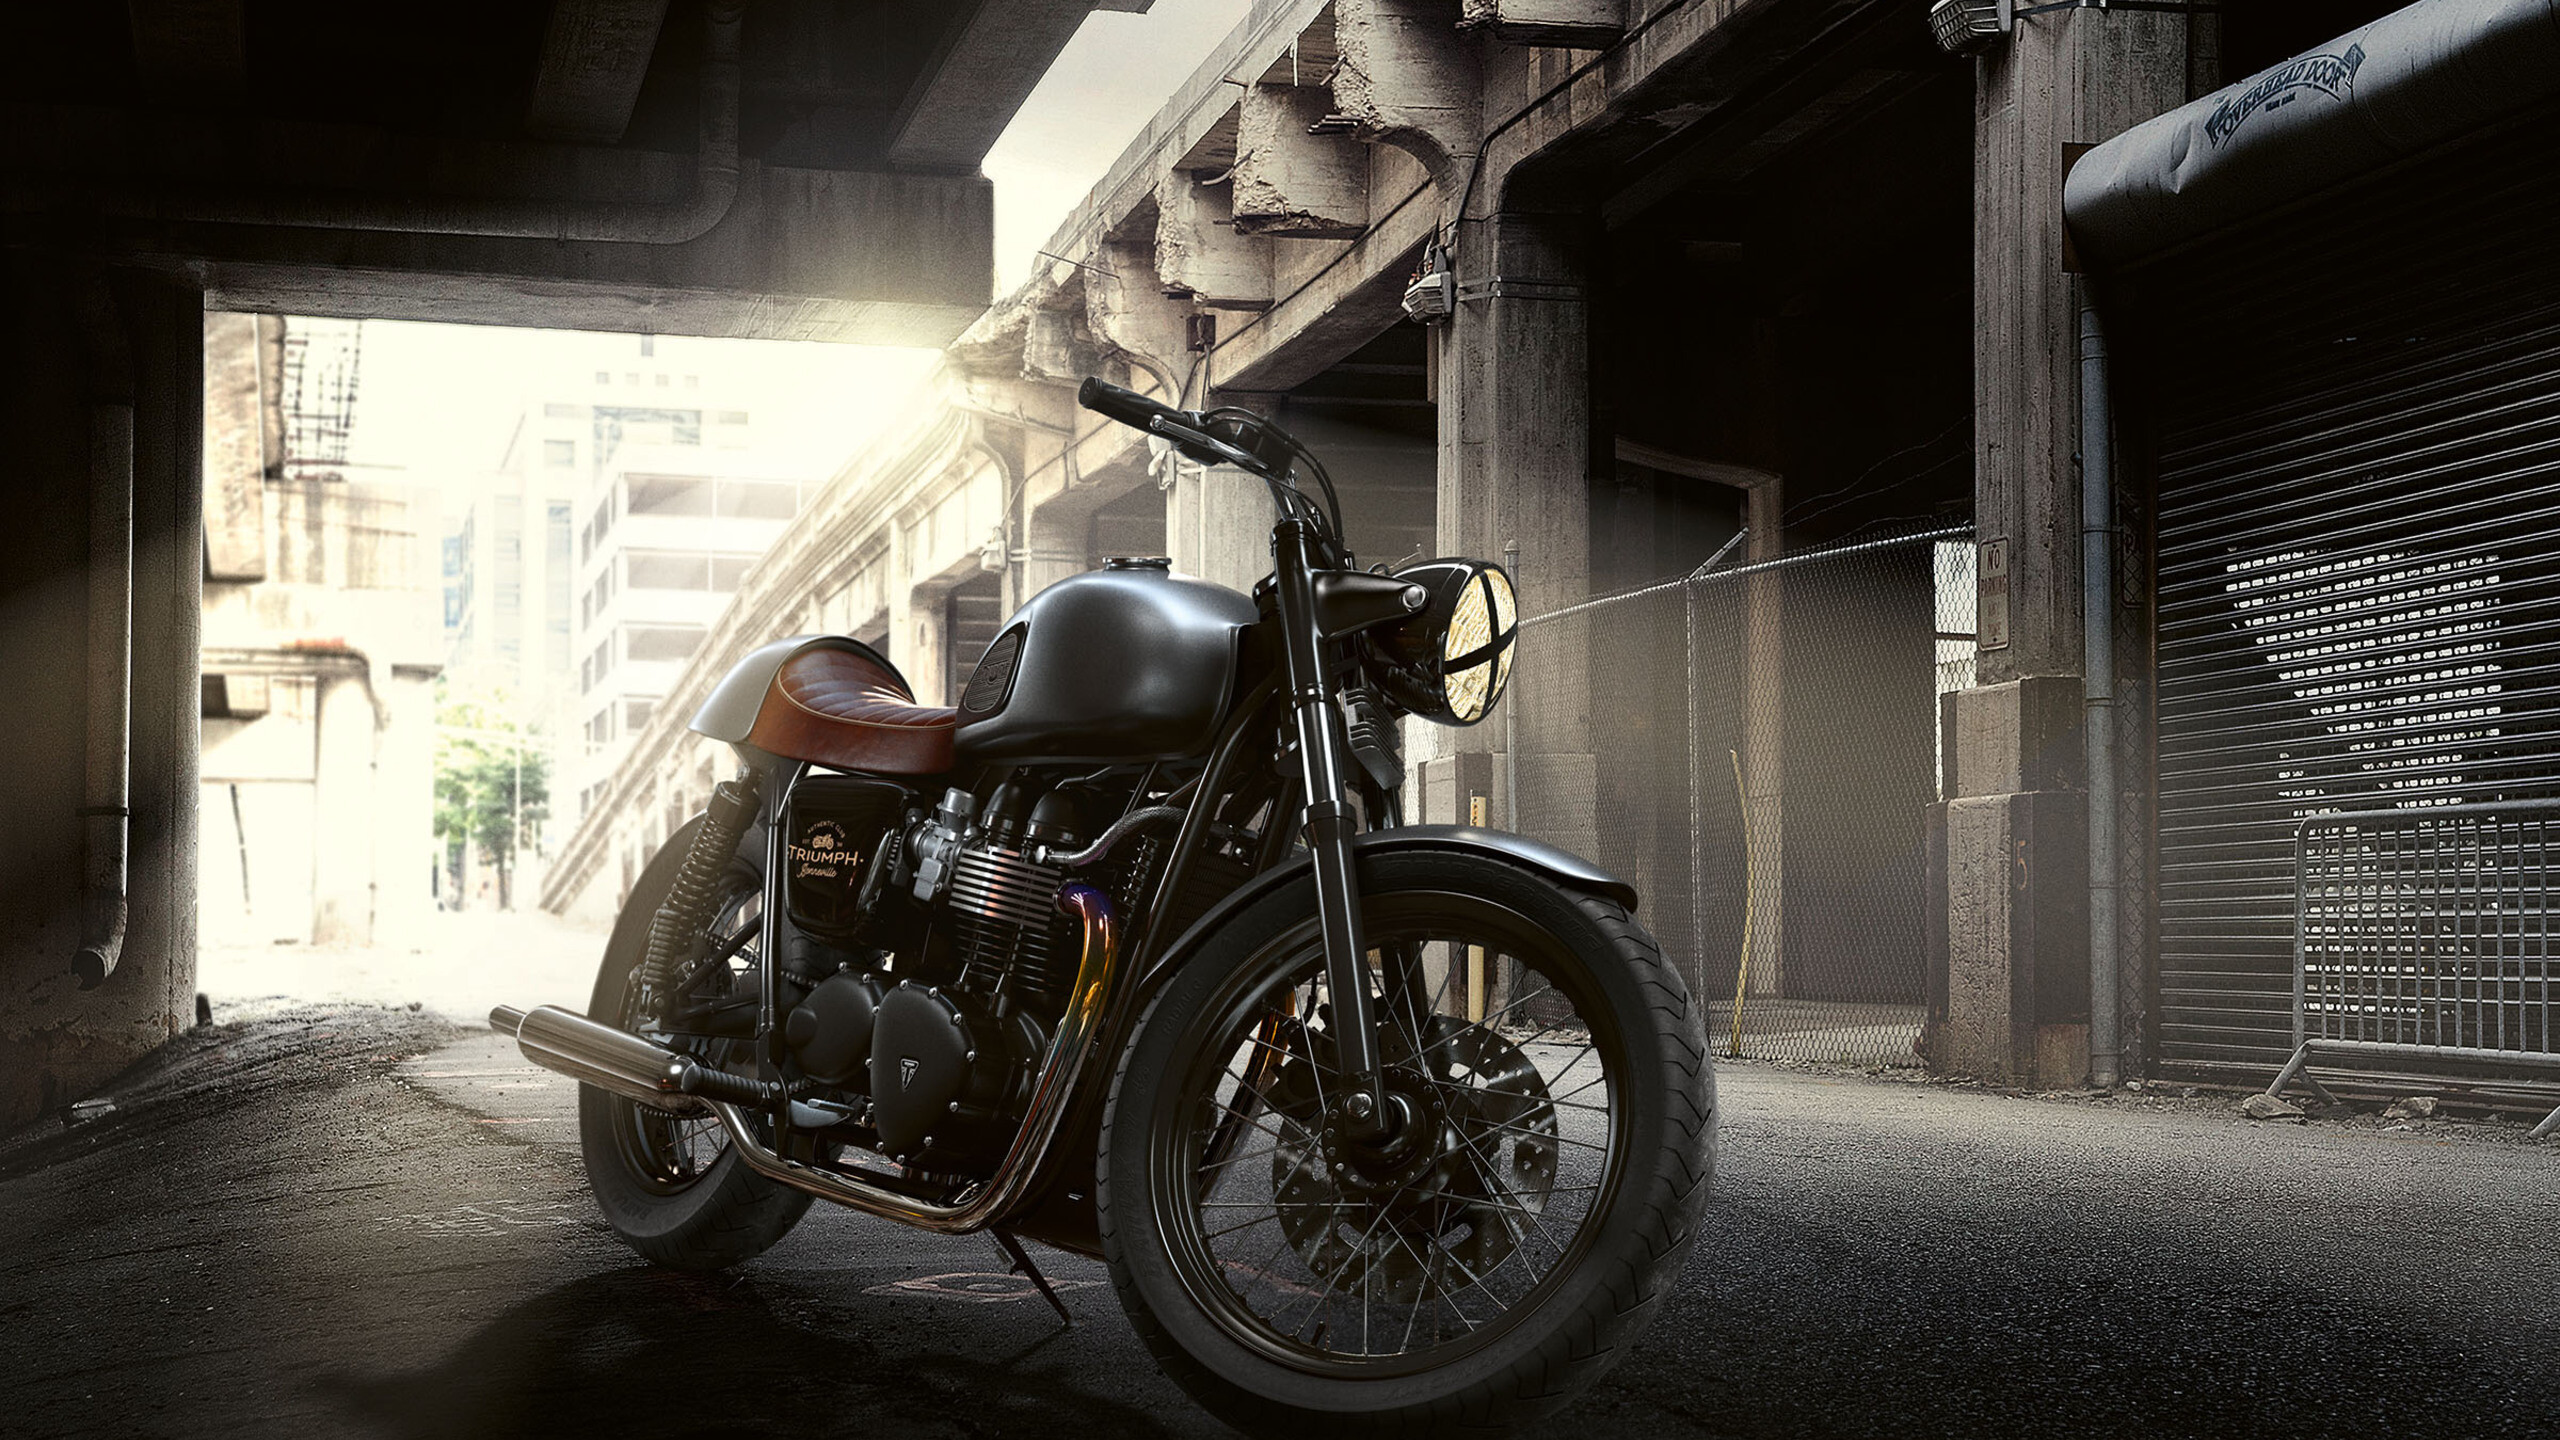 Triumph Motorcycles: Bonneville, A standard motorcycle featuring a parallel-twin four-stroke engine. 2560x1440 HD Wallpaper.